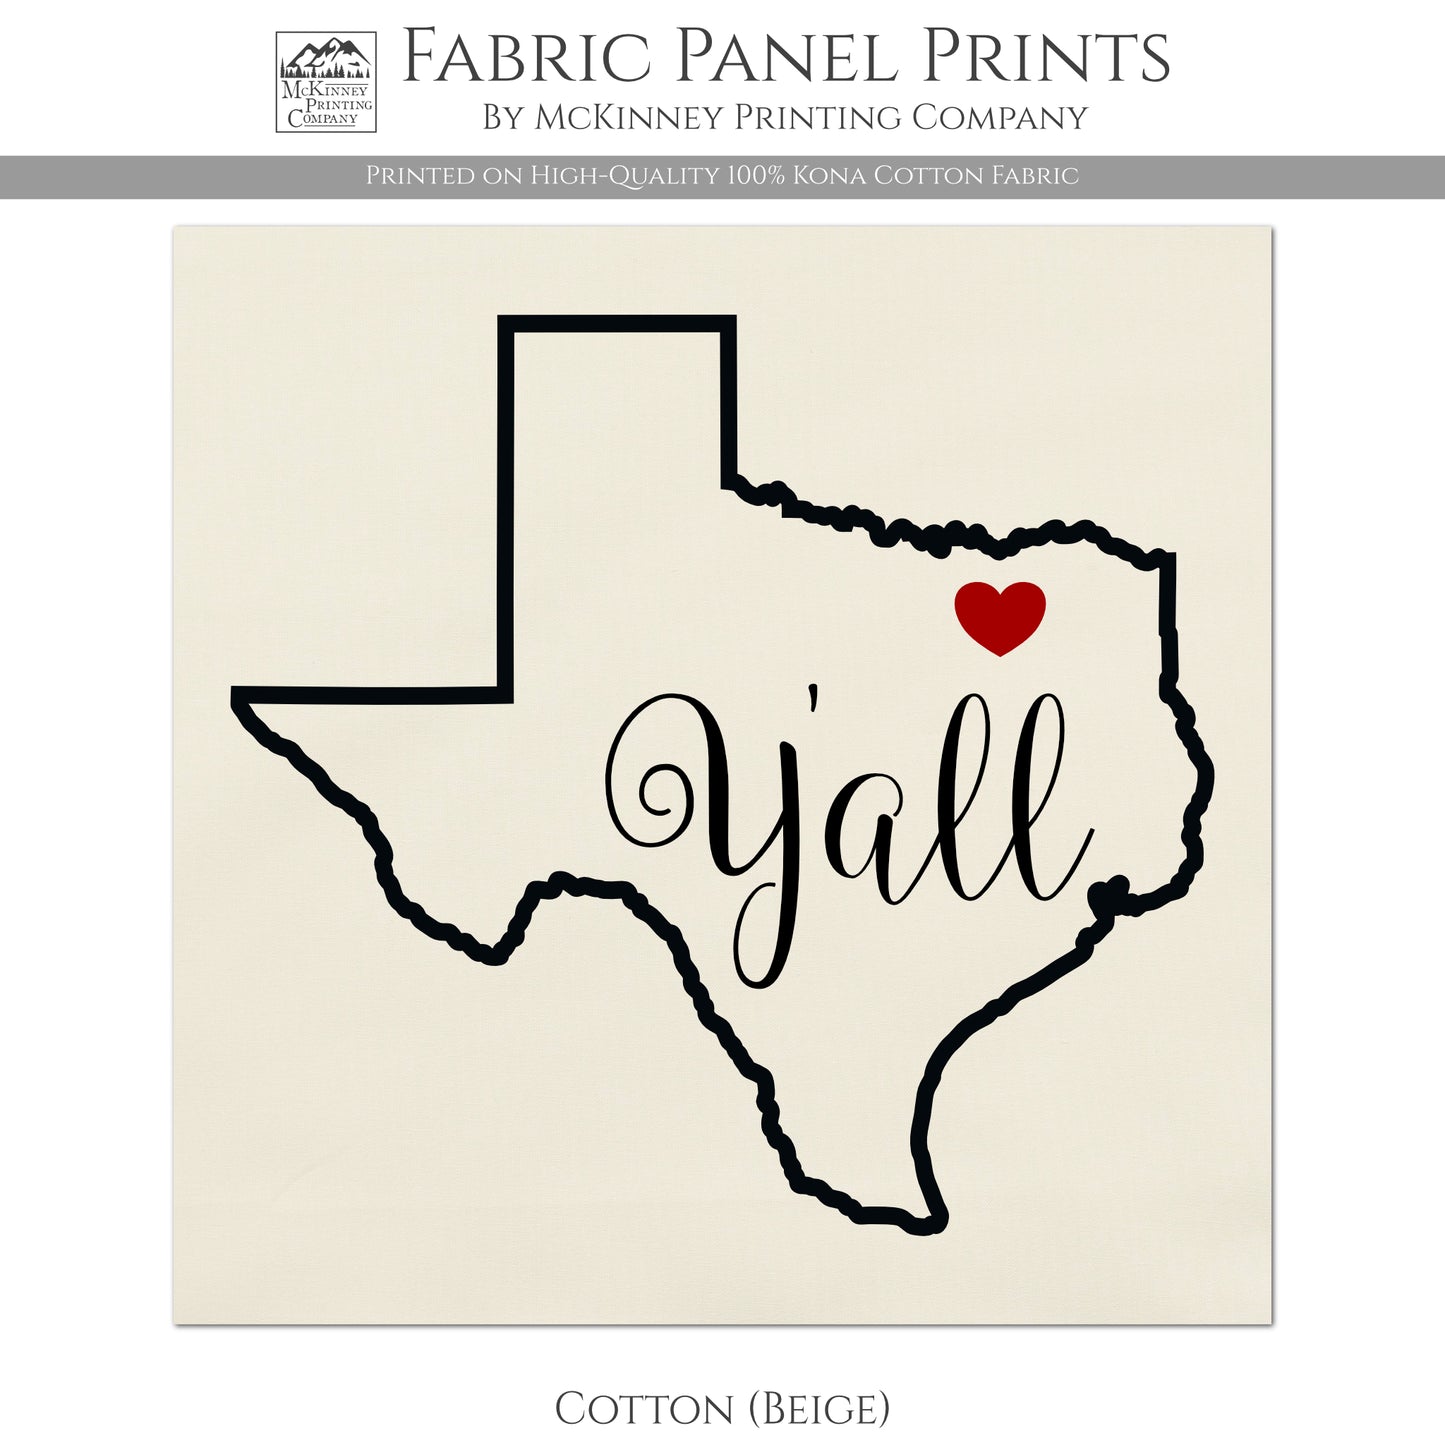 Texas Fabric - Texas Yall, State Outline - Cotton